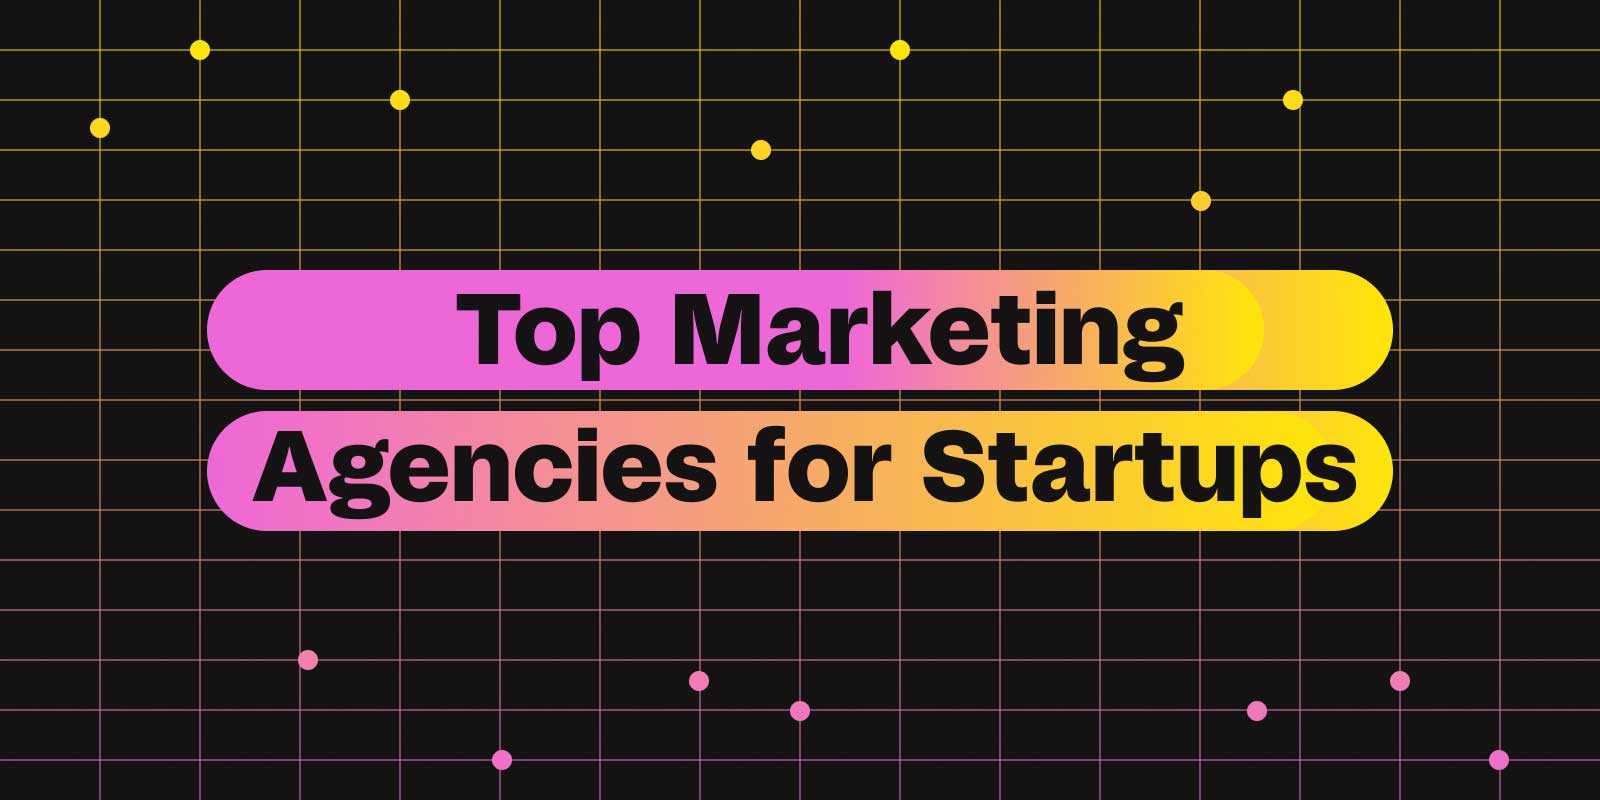 Top marketing Agencies for Startups